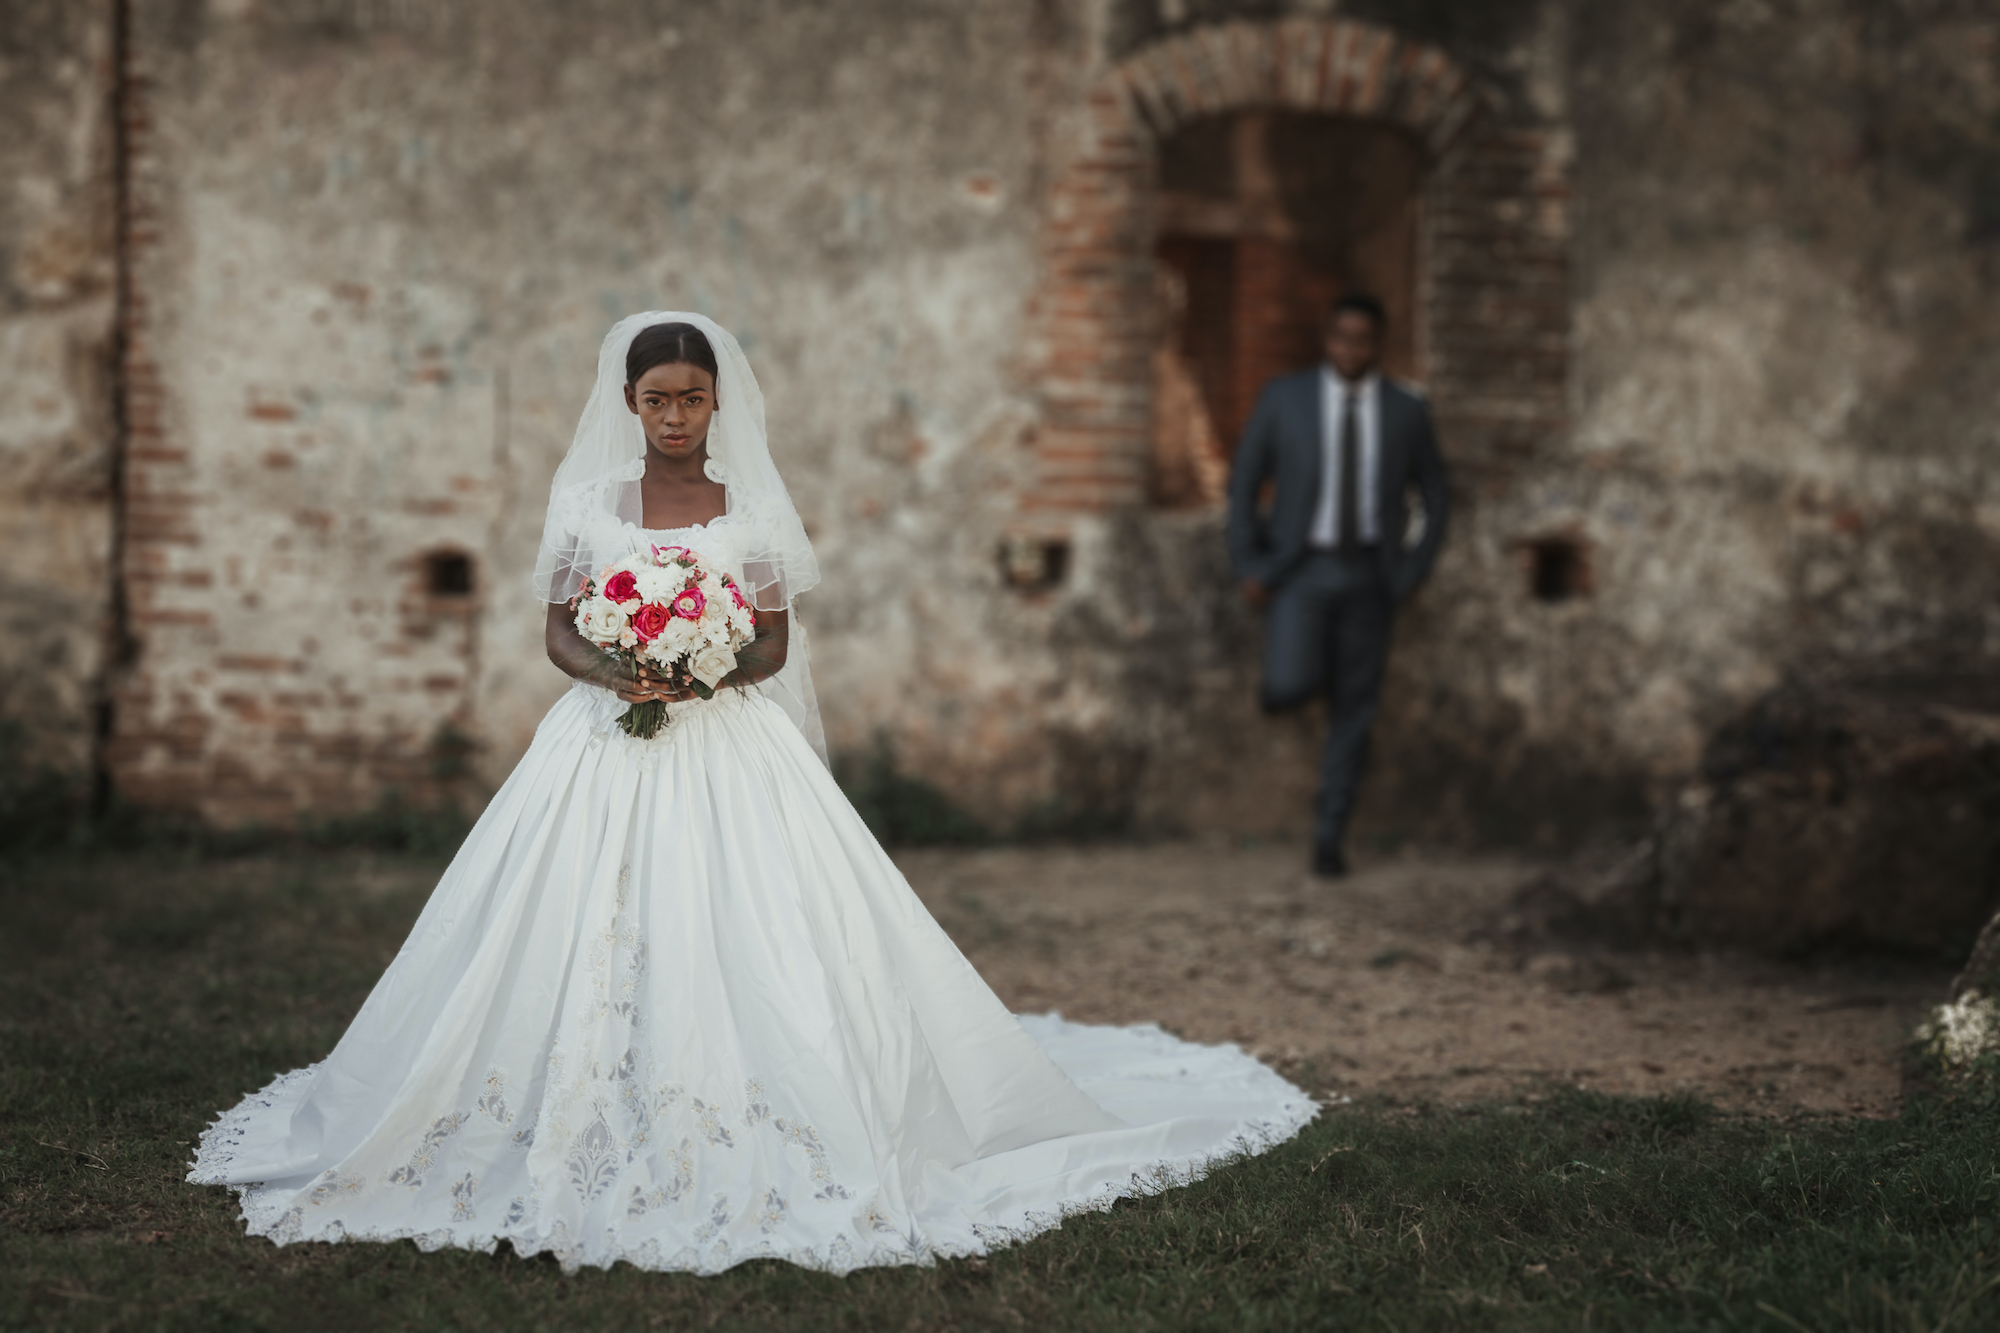 13 year old Lauri supported by Compassion in Dominican Republic in a staged photoshoot to protest child marriage Image 4 Compassion International copy